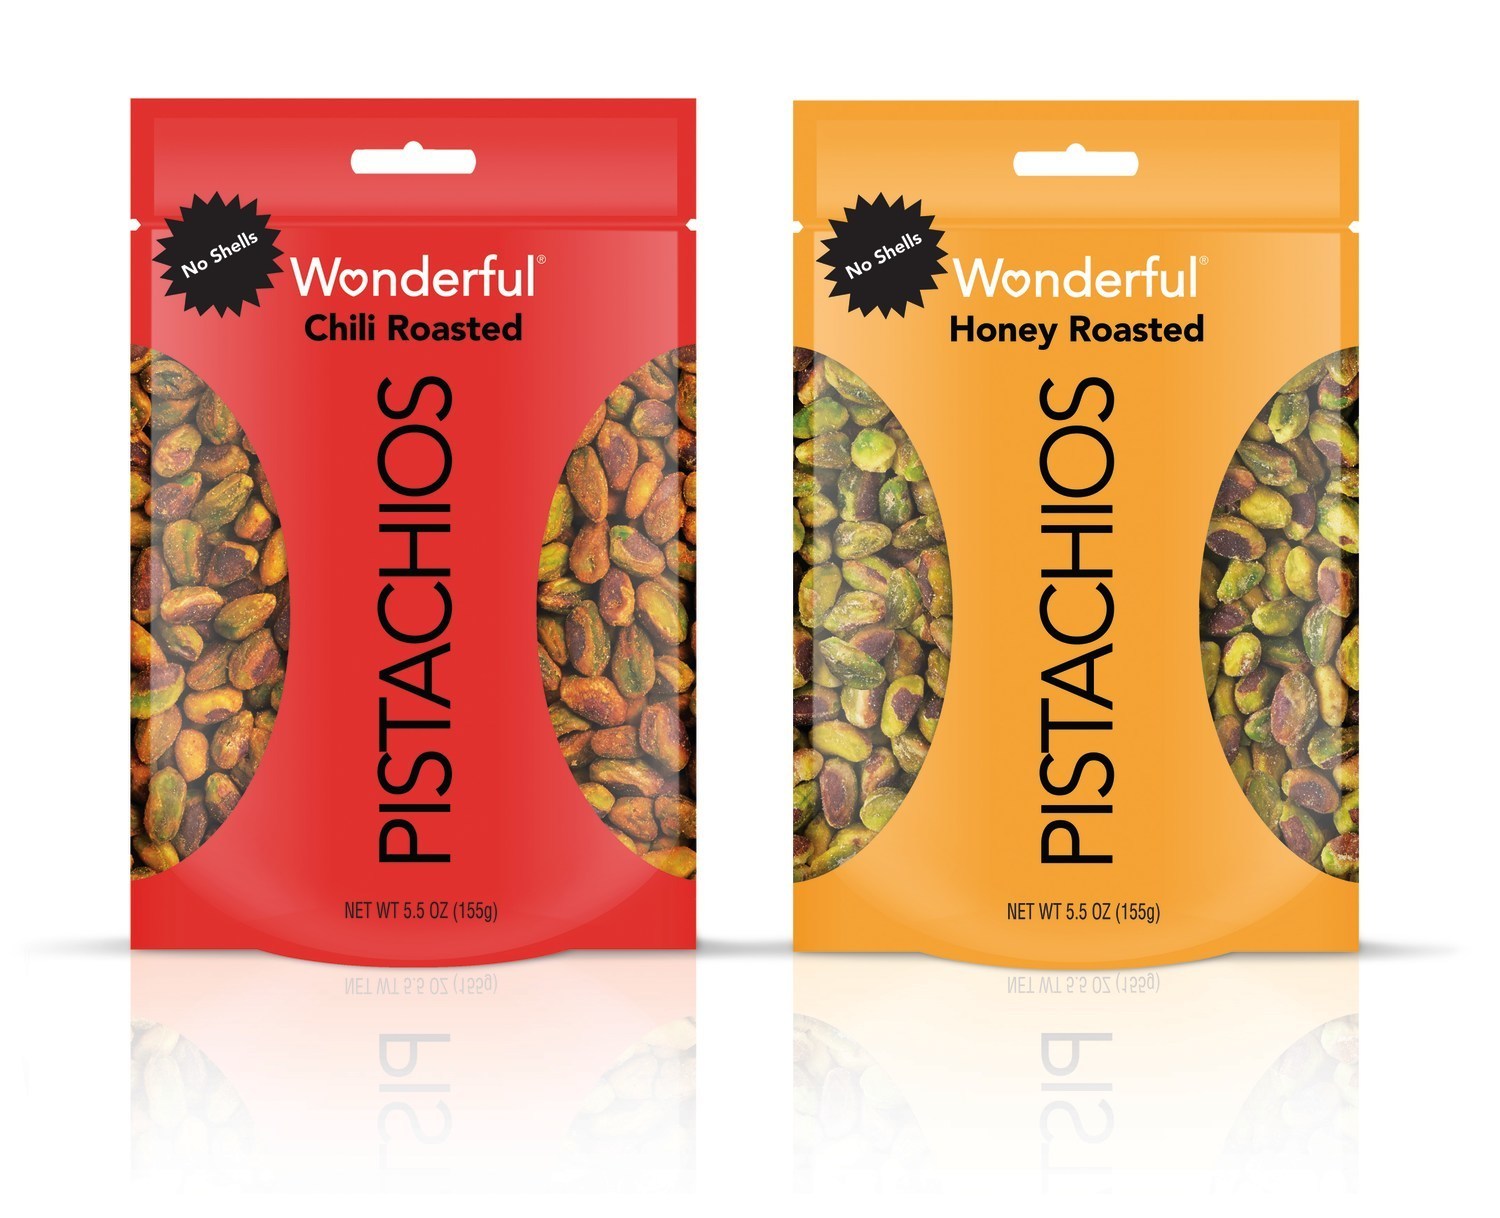 Wonderful Pistachios releases two new variants without shells